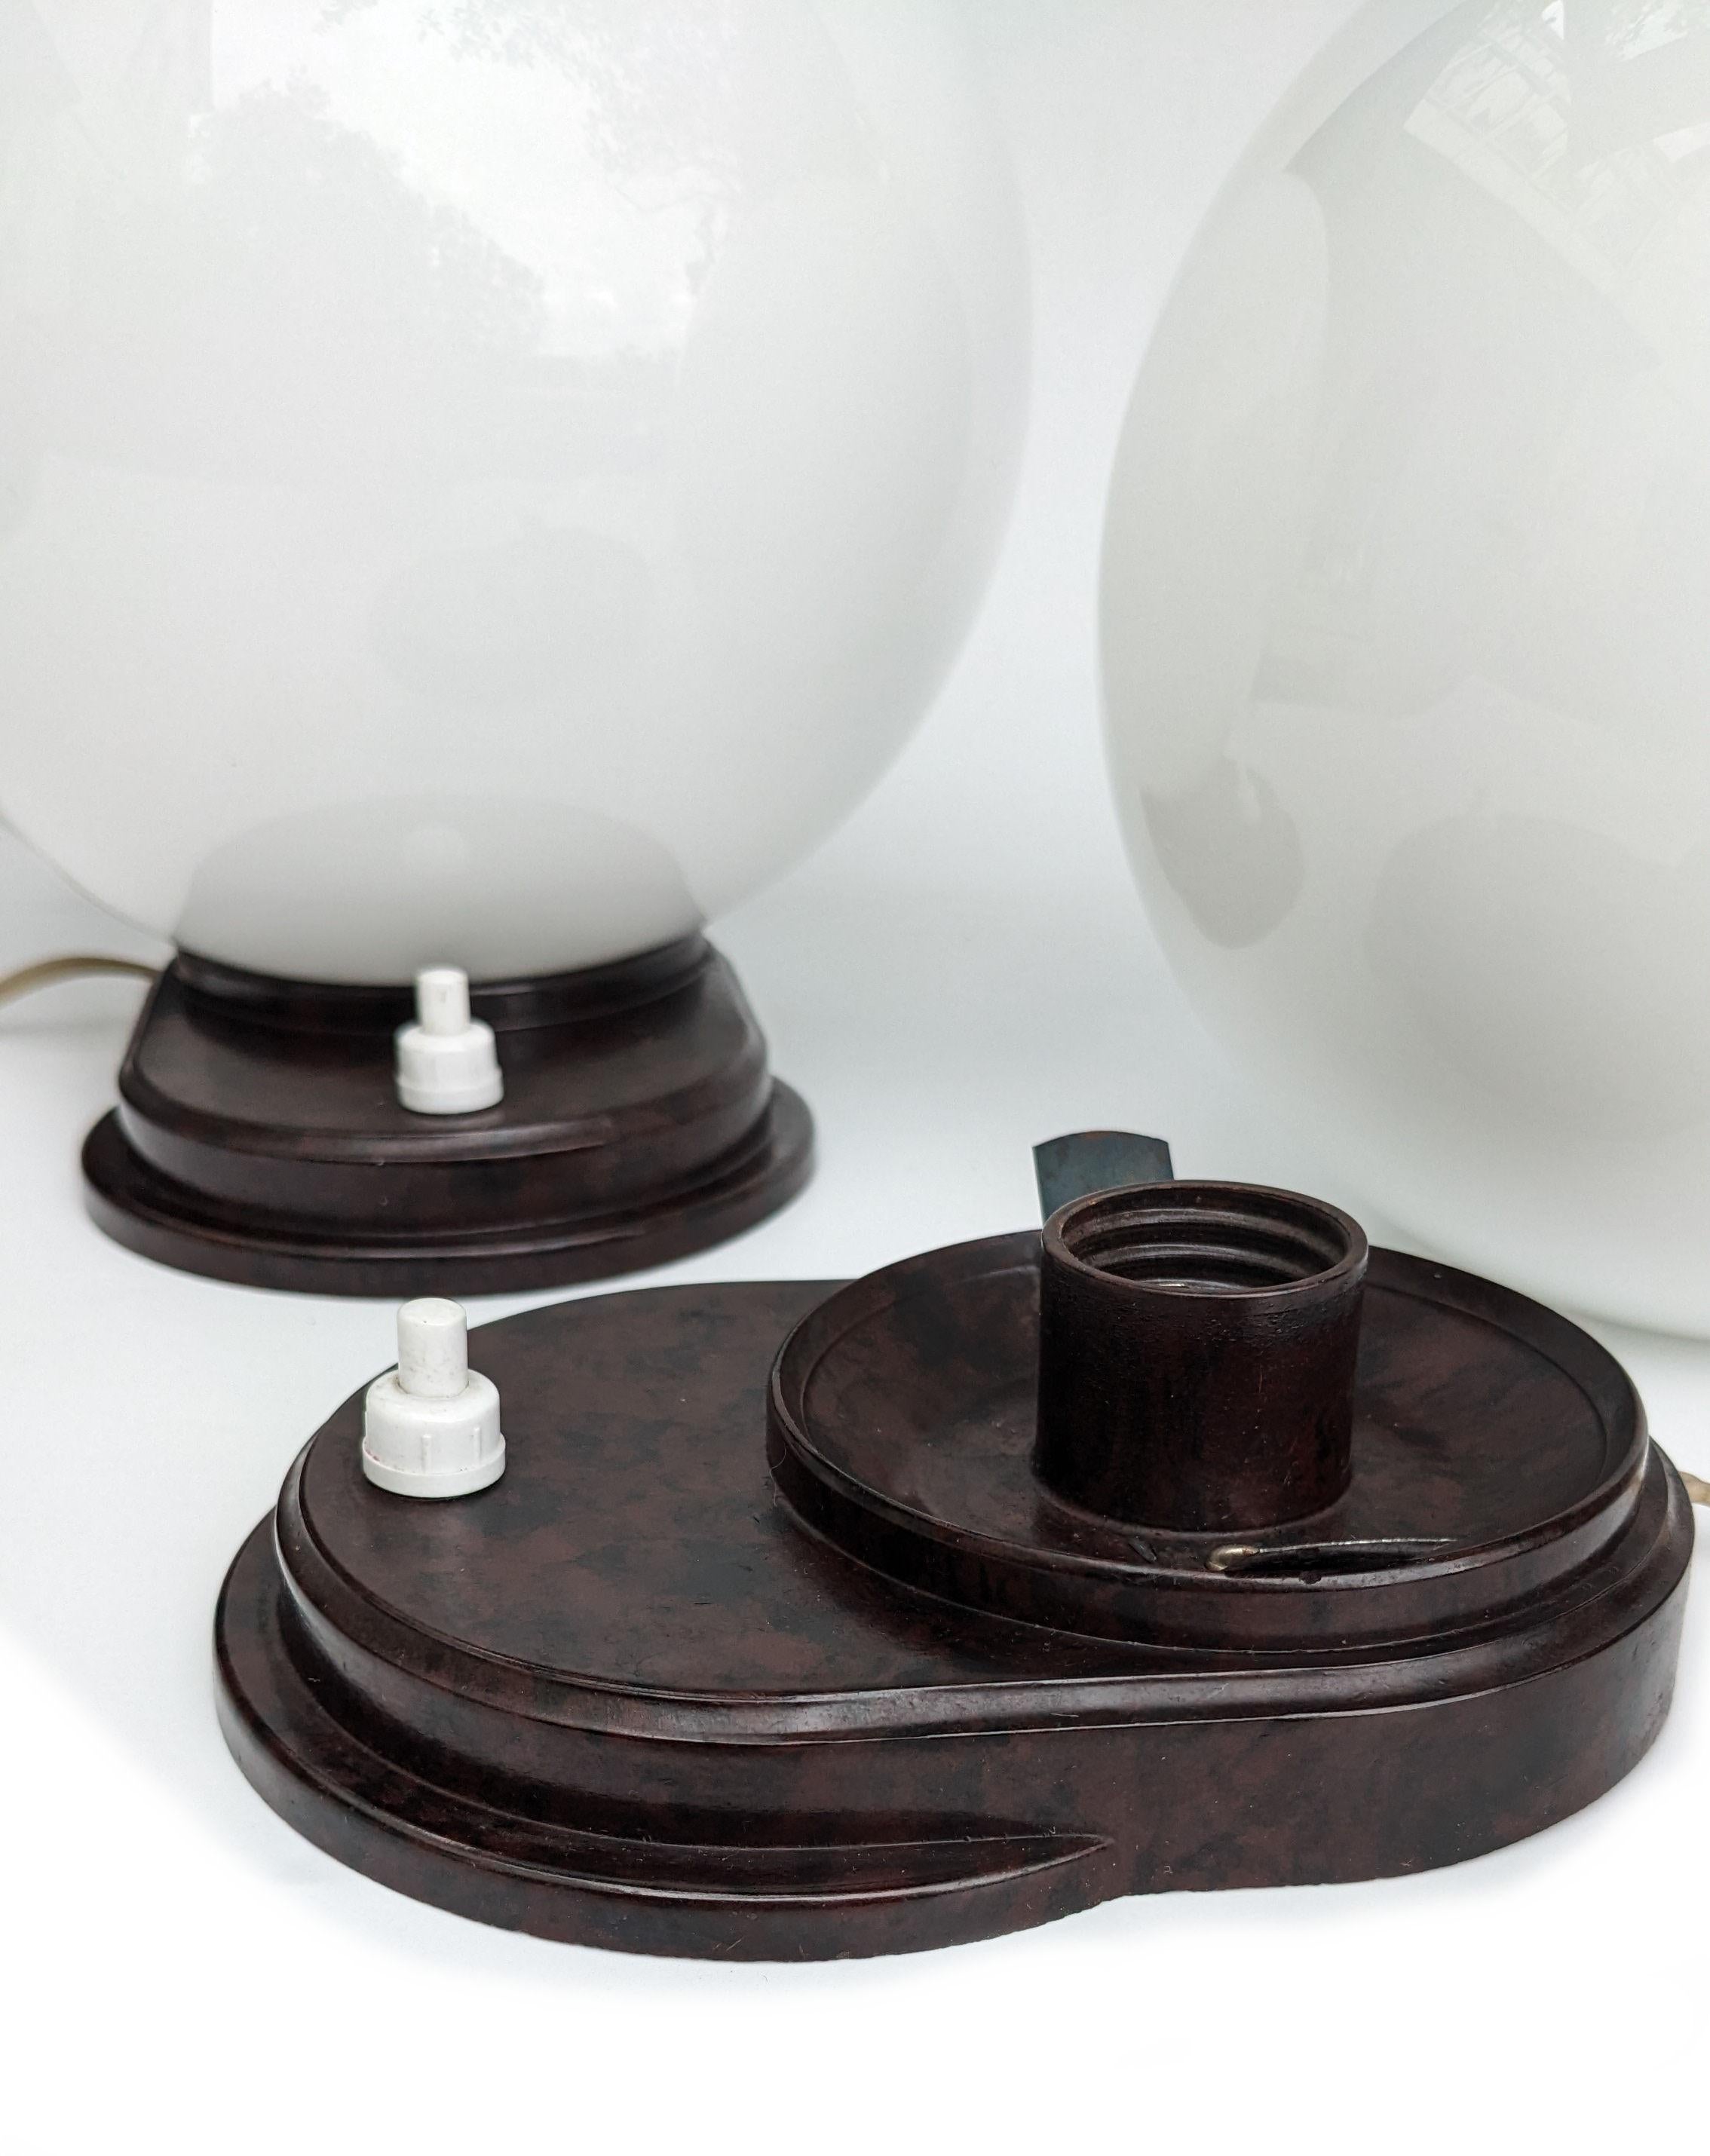 For your consideration are these original matching pair of Modernist table lamps dating to the 1930s. Both have mottled streamline bakelite bases which supports a large milk glass globe shade. They are both in excellent condition with no damages